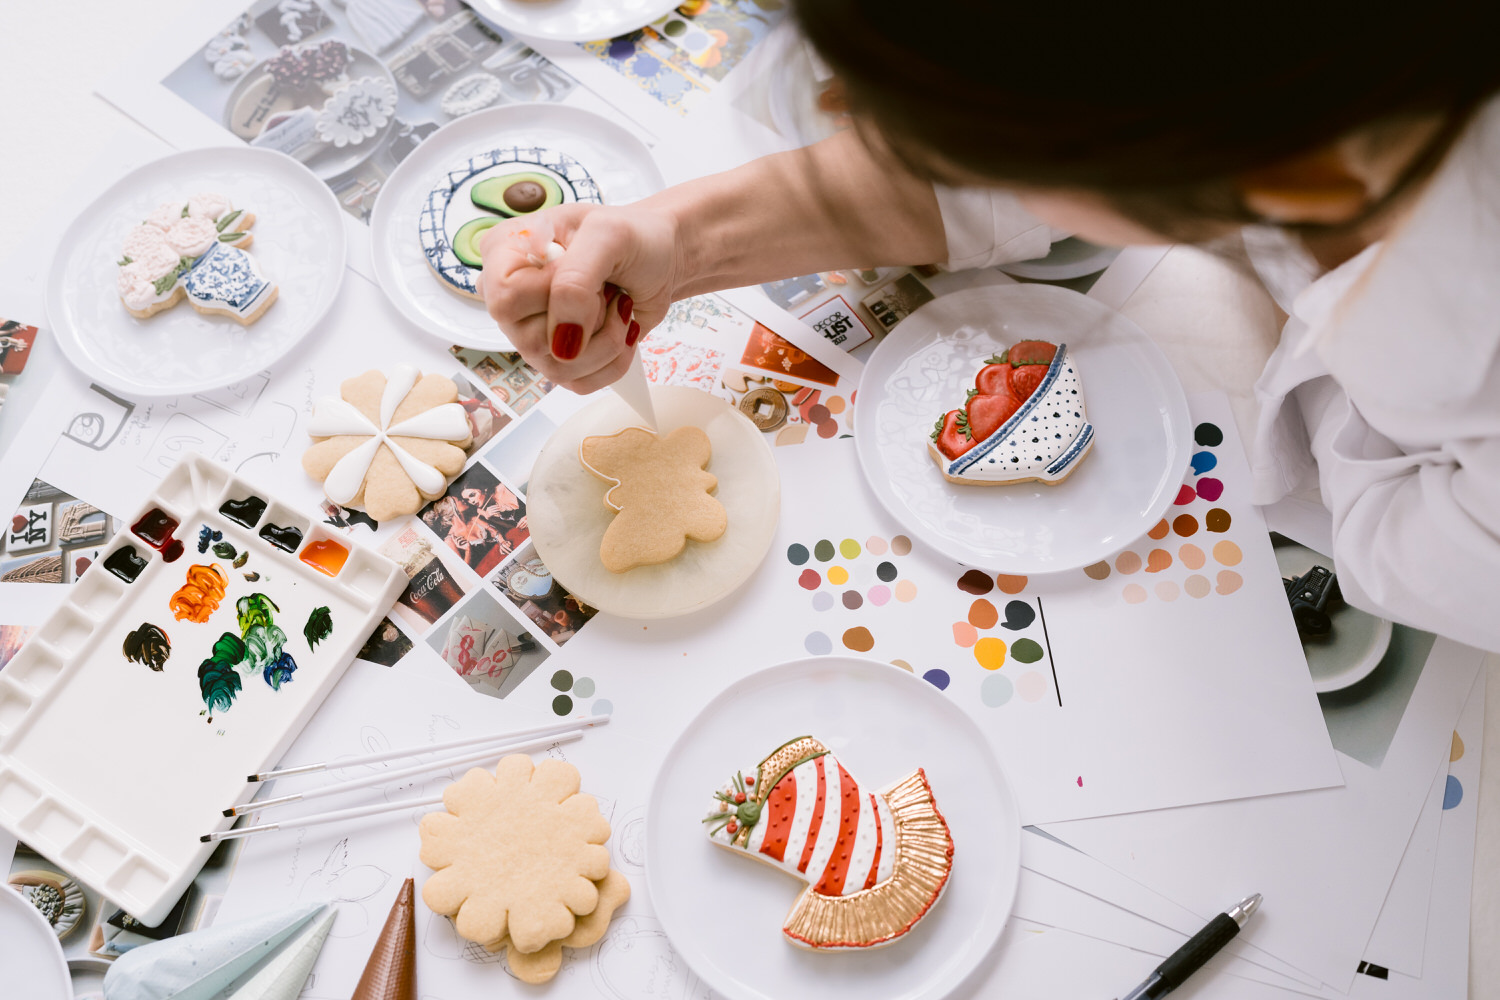 Person creating art on cookies during a brand photoshoot